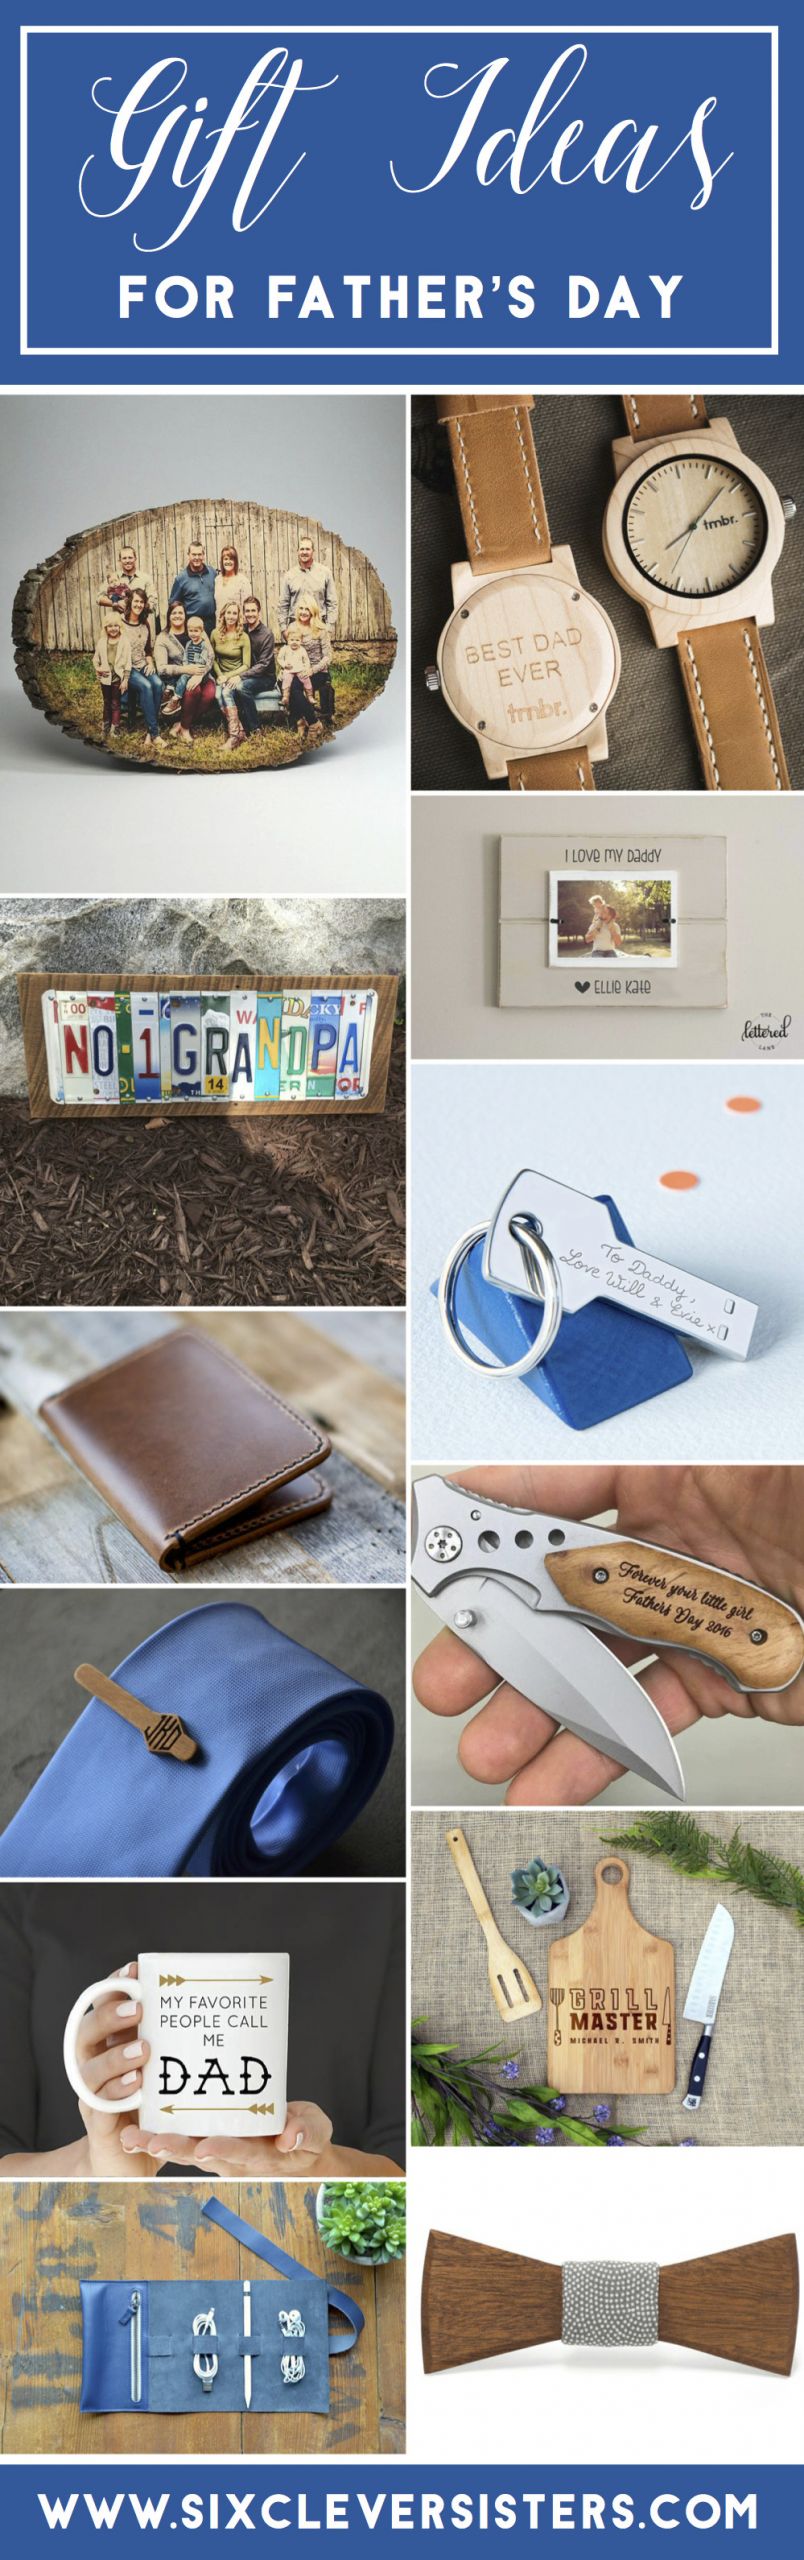 Best Father'S Day Gift Ideas
 25 Great Father s Day Gift Ideas on Etsy that are amazing